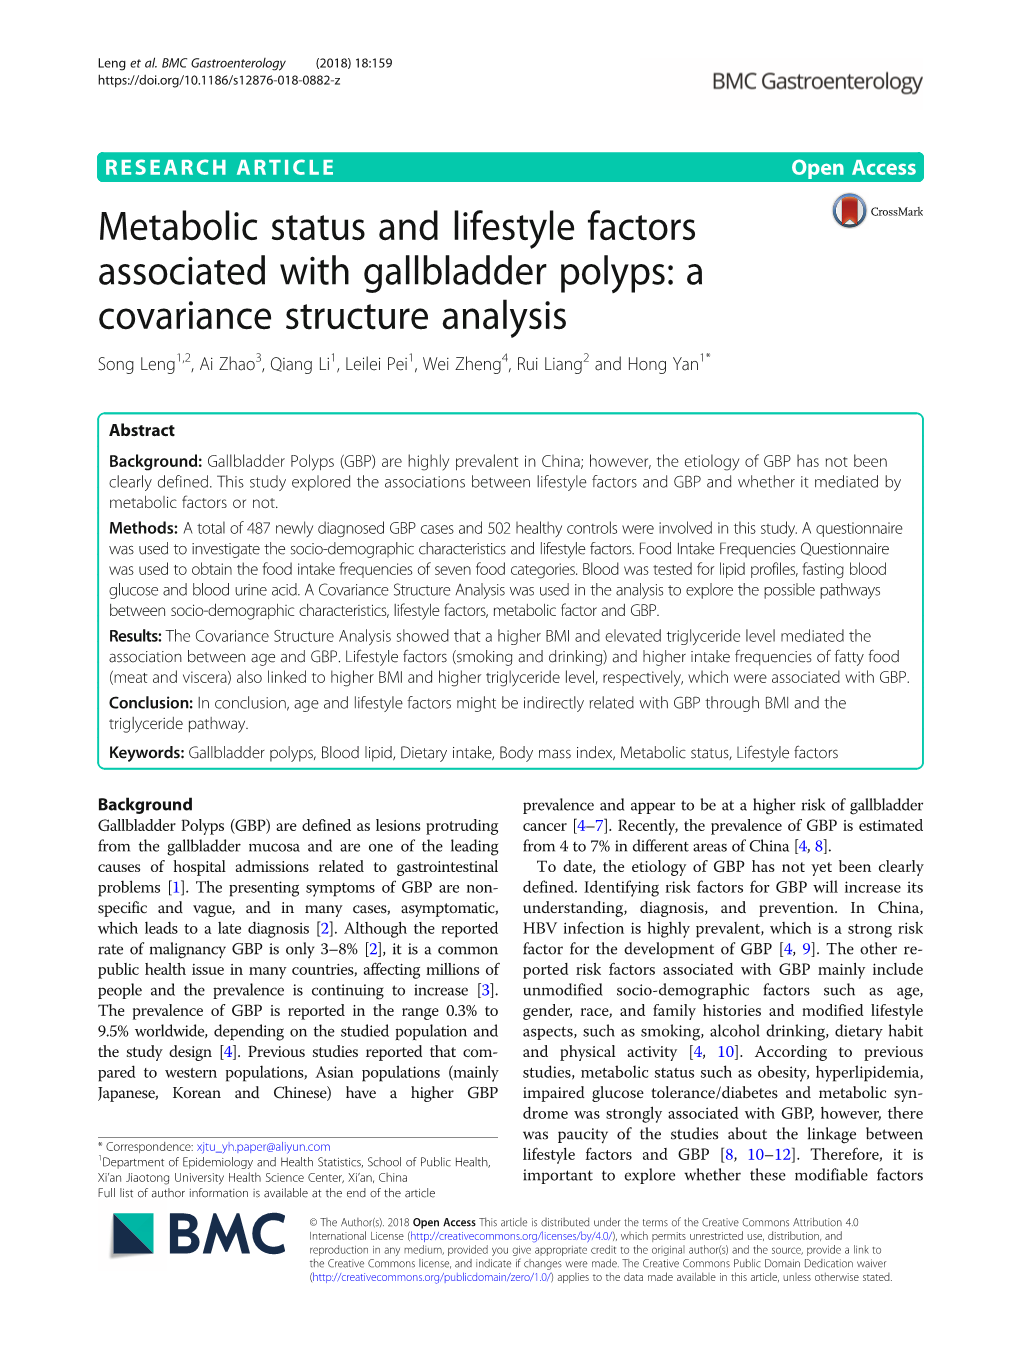 Metabolic Status and Lifestyle Factors Associated